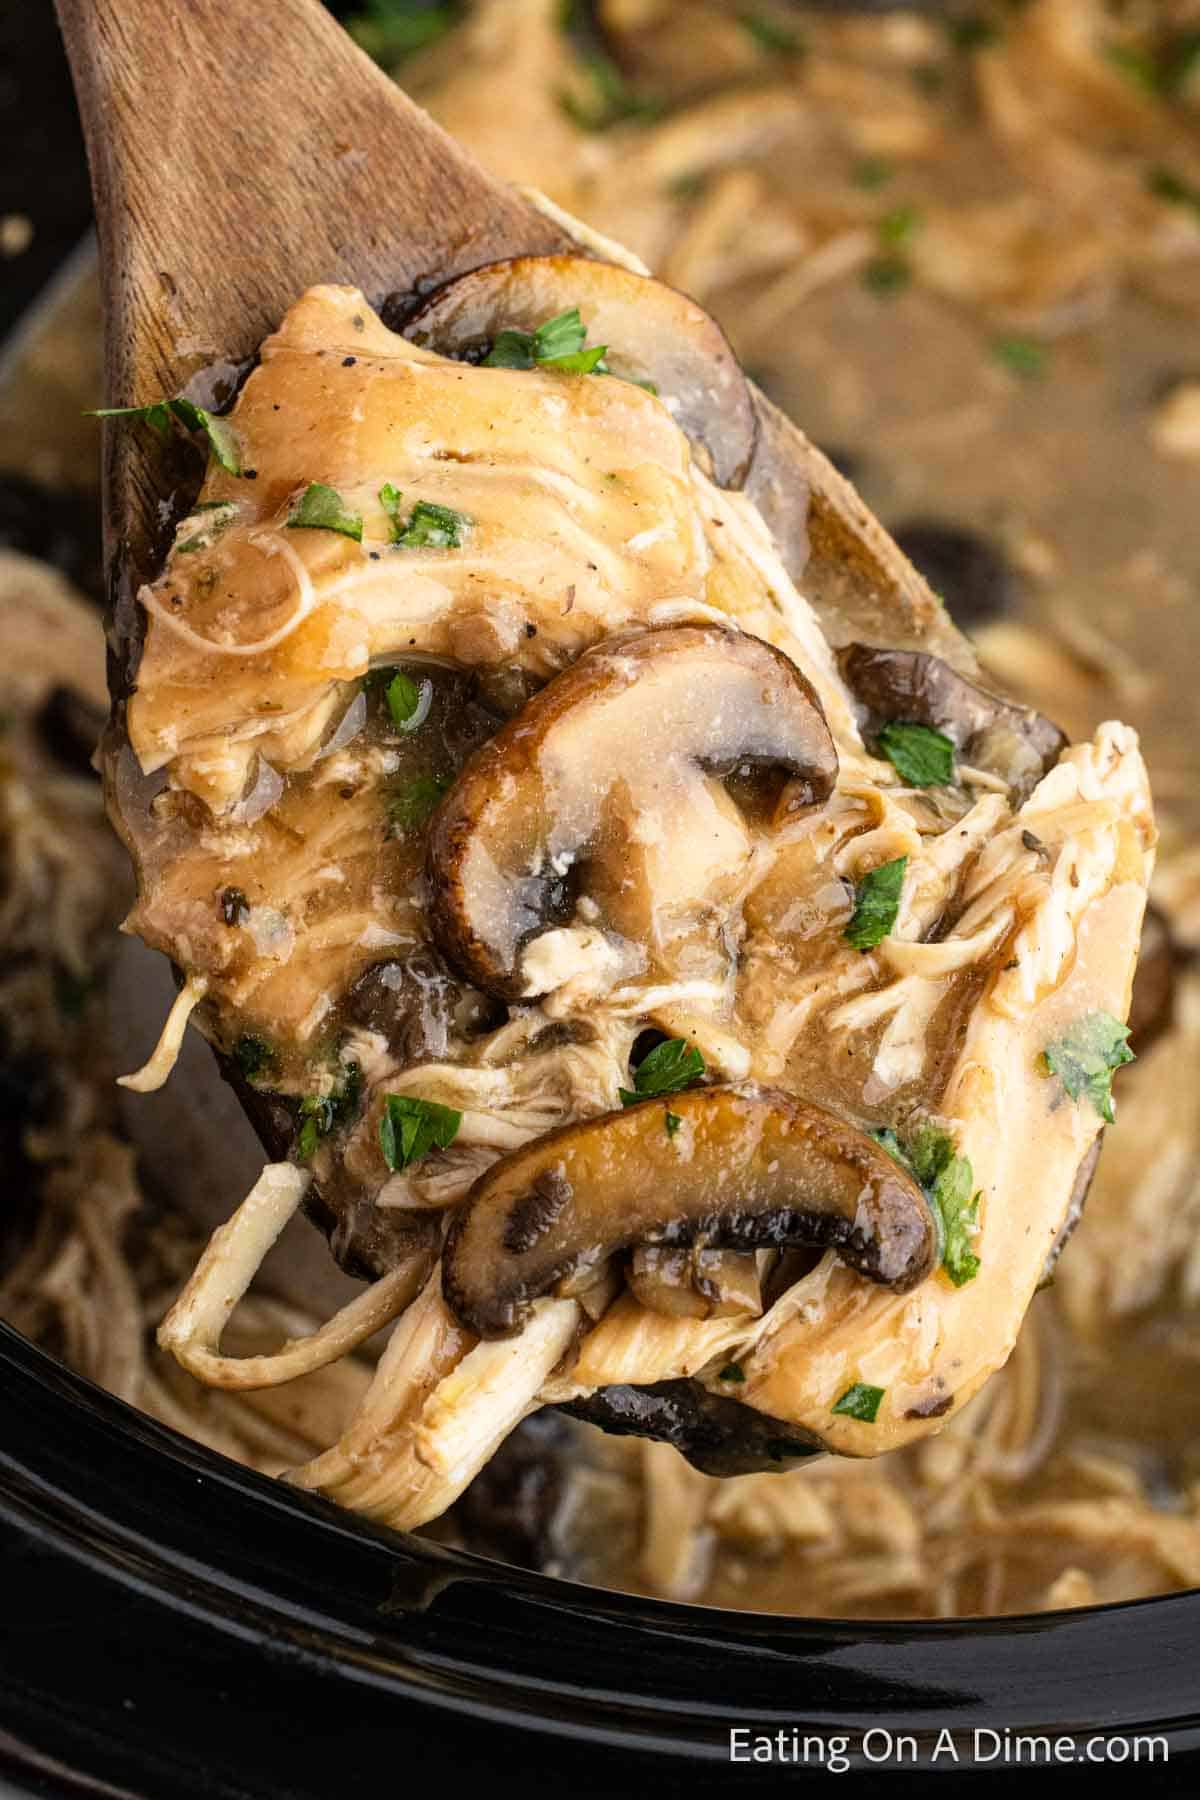 Shredded chicken in sauce with mushrooms on a wooden spoon